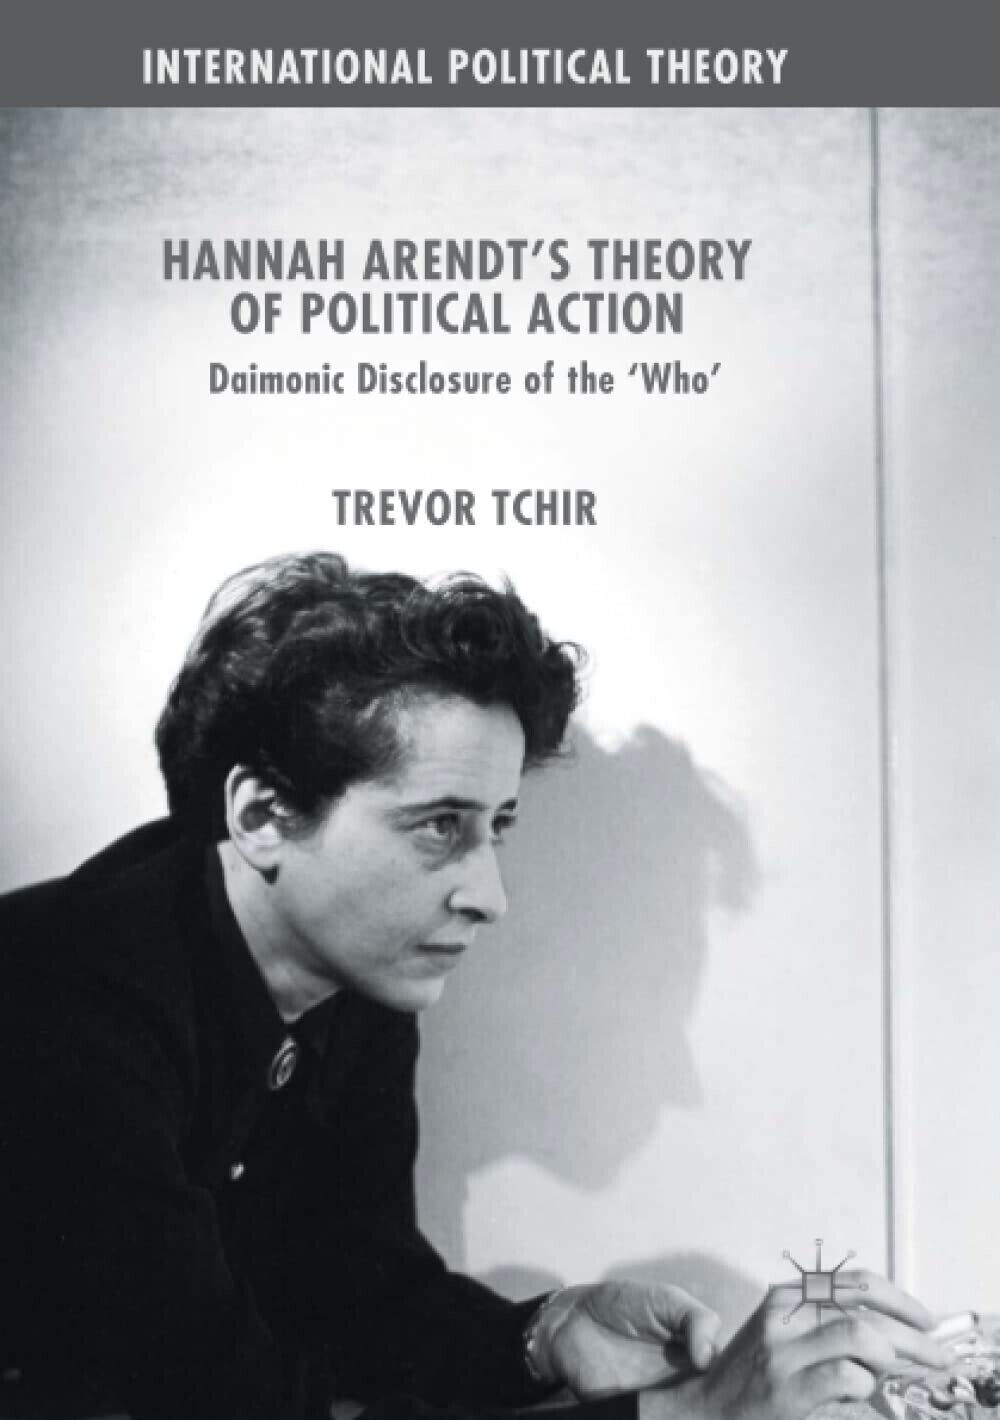 Hannah Arendt's Theory of Political Action - Trevor Tchir - Palgrave, 2018